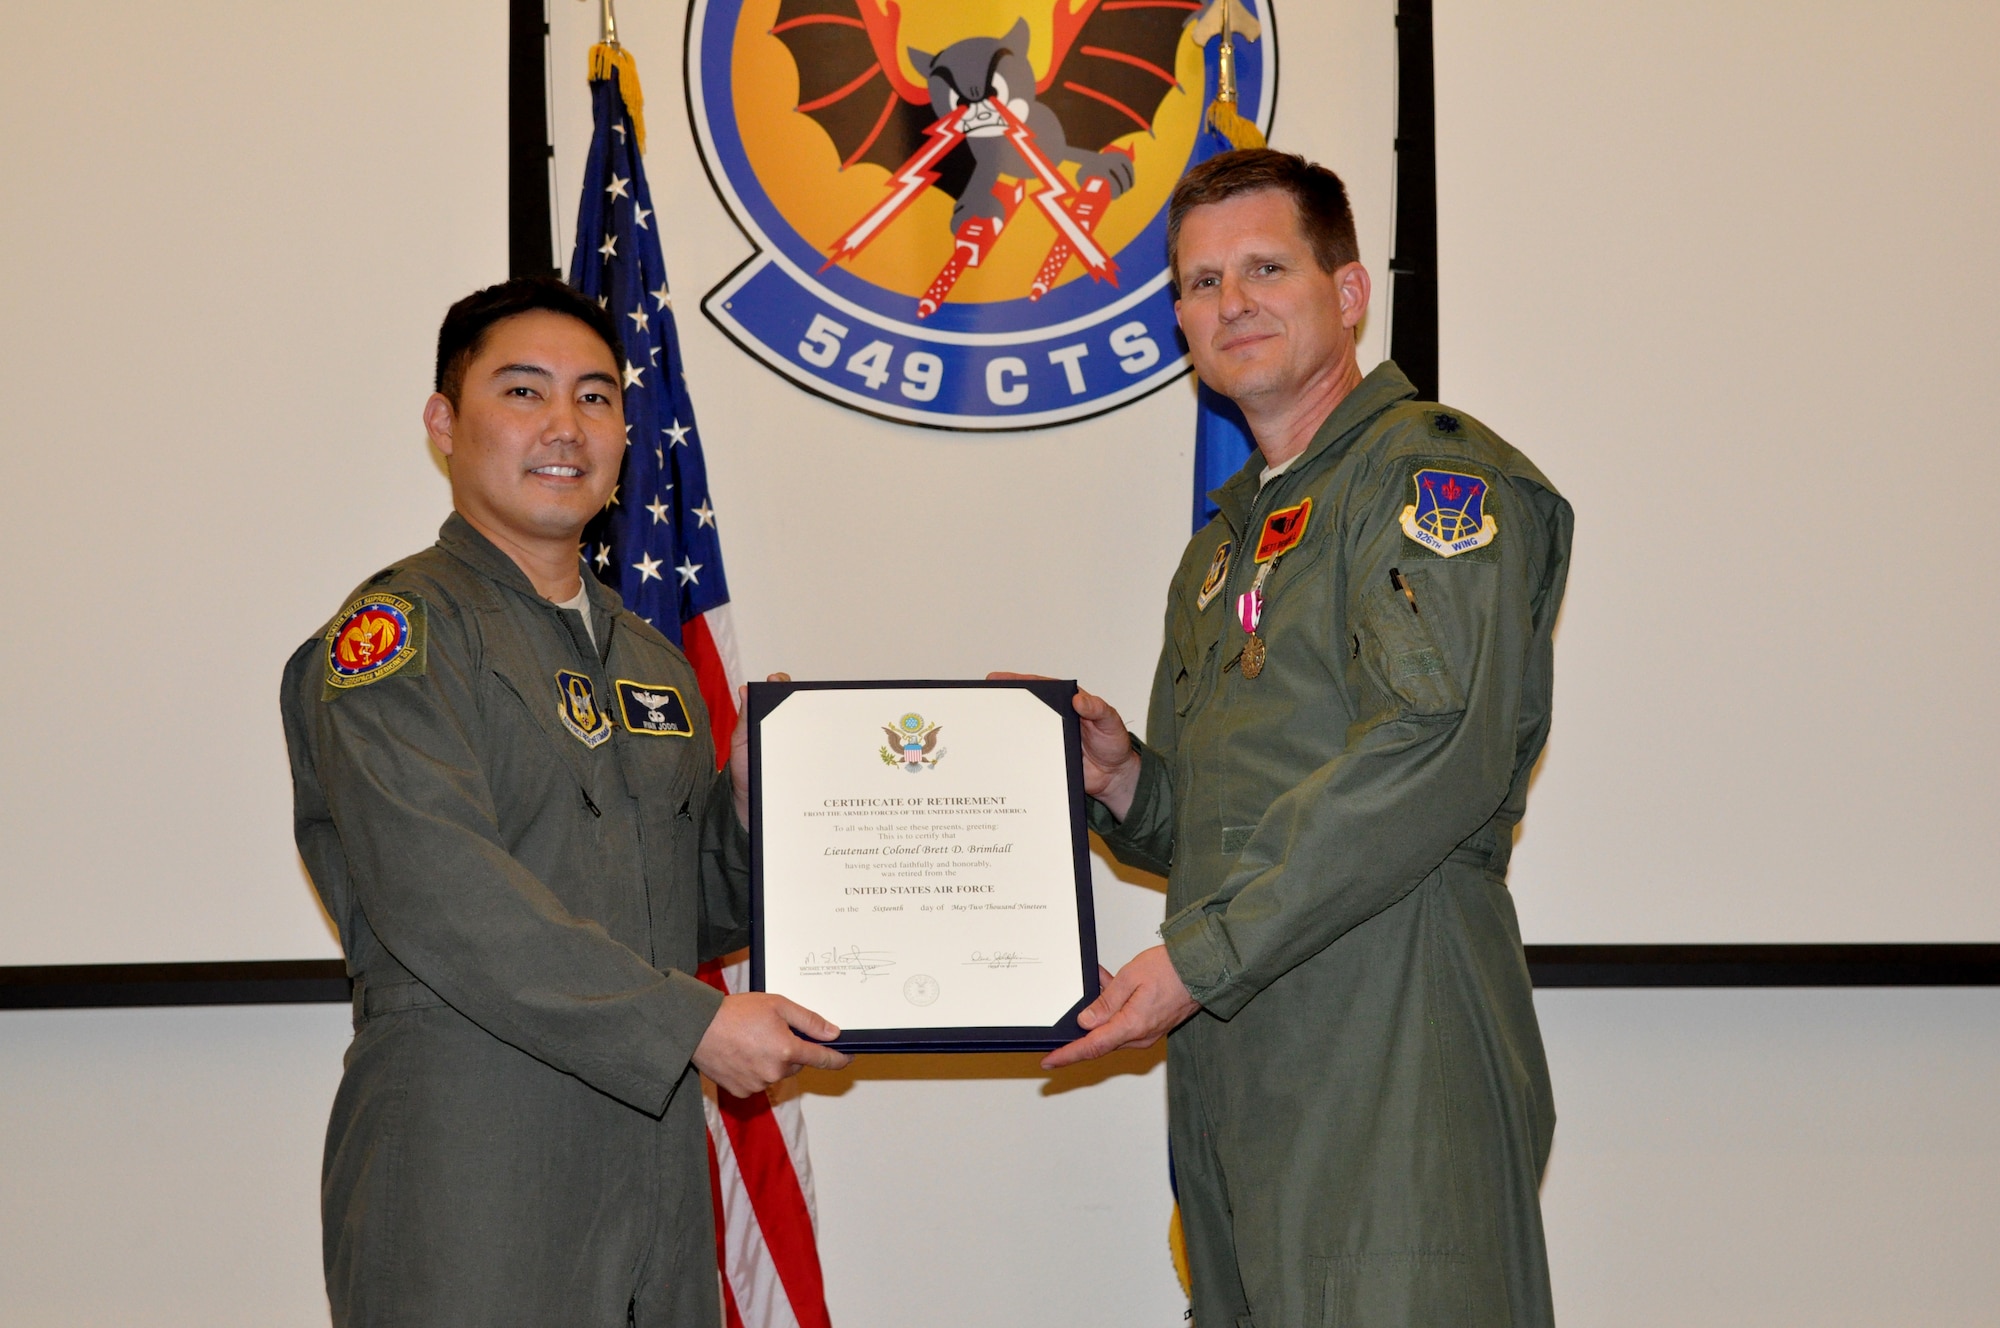 Lt. Col. Brett Brimhall, a 926th Aerospace Medicine Squadron flight surgeon and chief of medical staff, retires in a ceremony on Nellis Air Force Base, Nev., on April 7, 2019 after 24 years of military service.